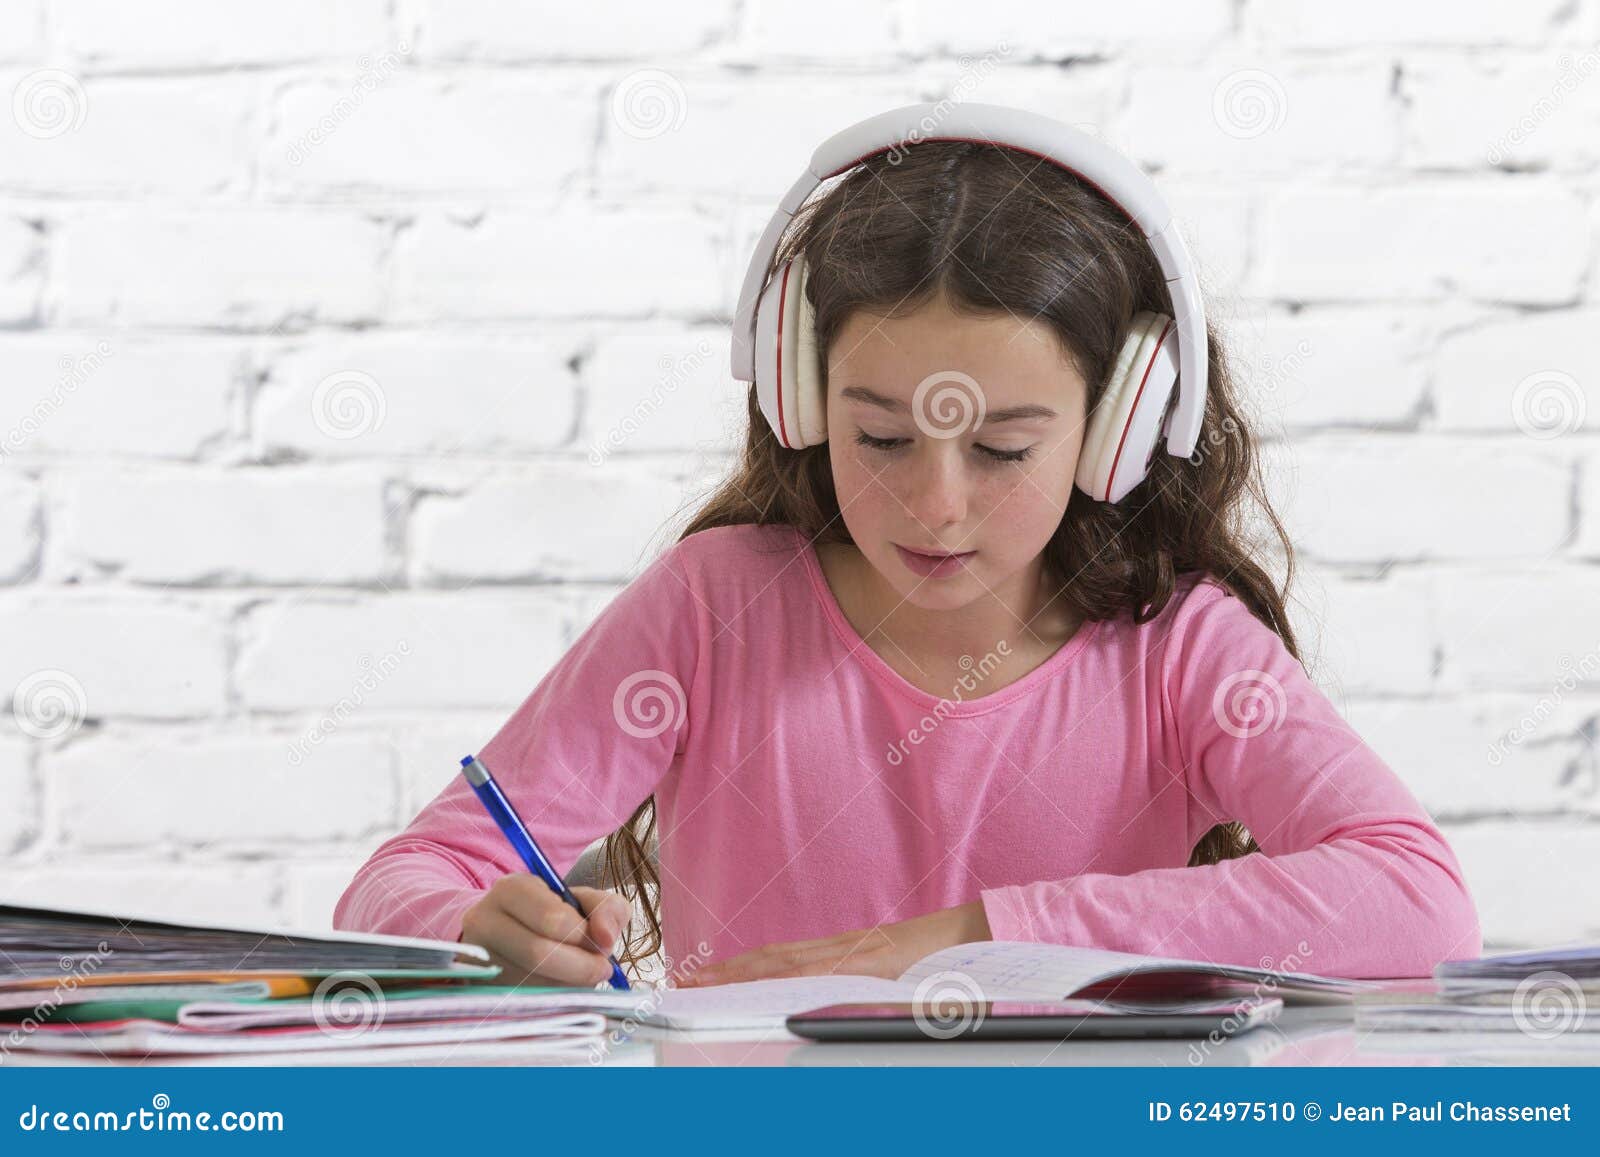 homework with songs